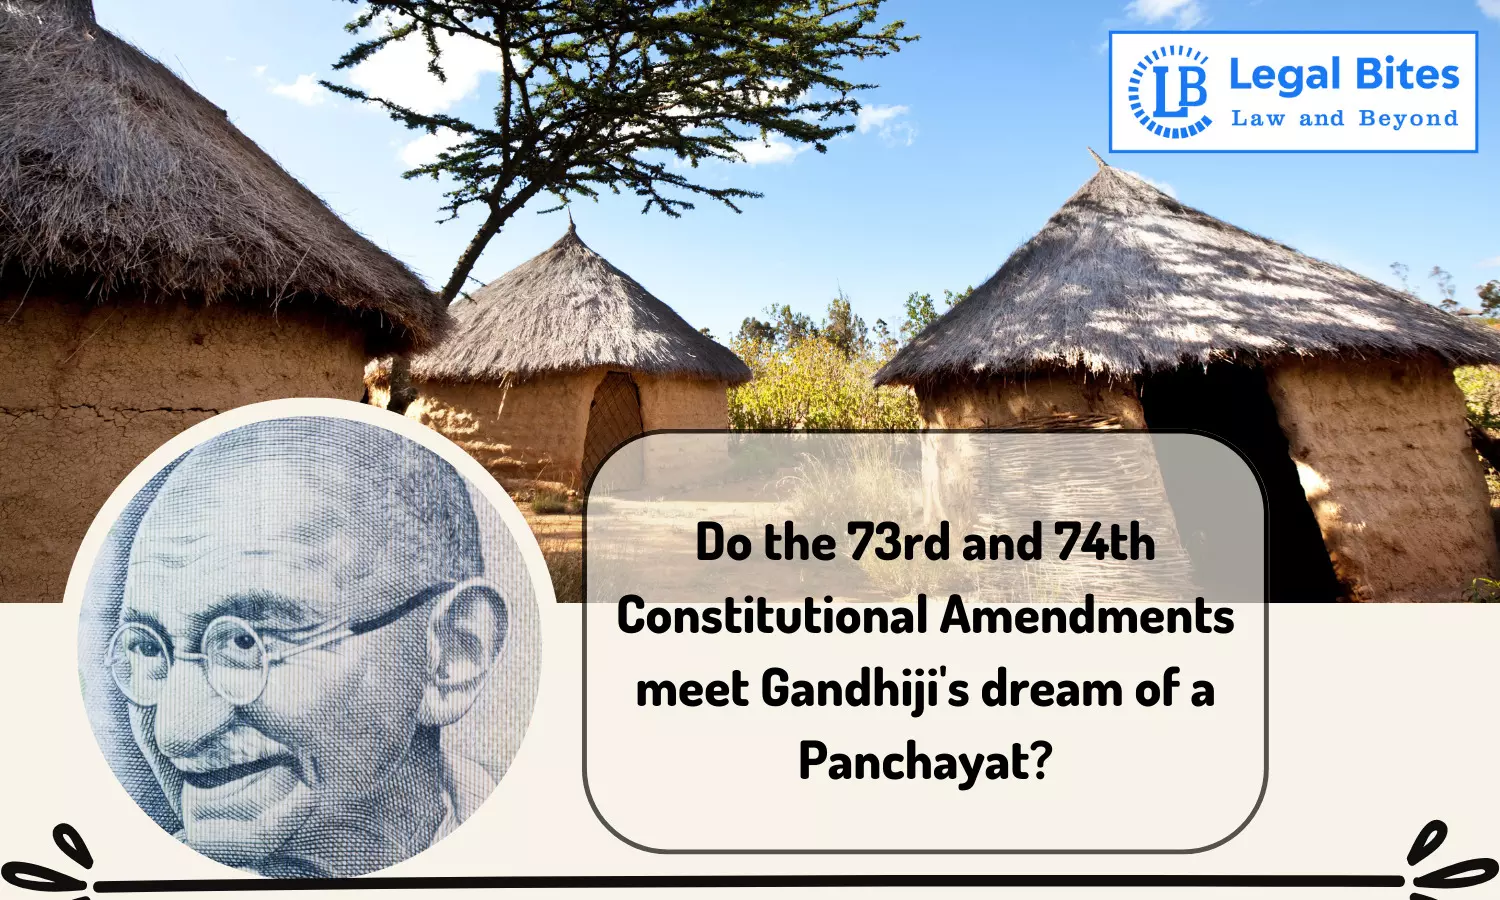 Do the 73rd and 74th Constitutional Amendments meet Gandhijis dream of a panchayat?